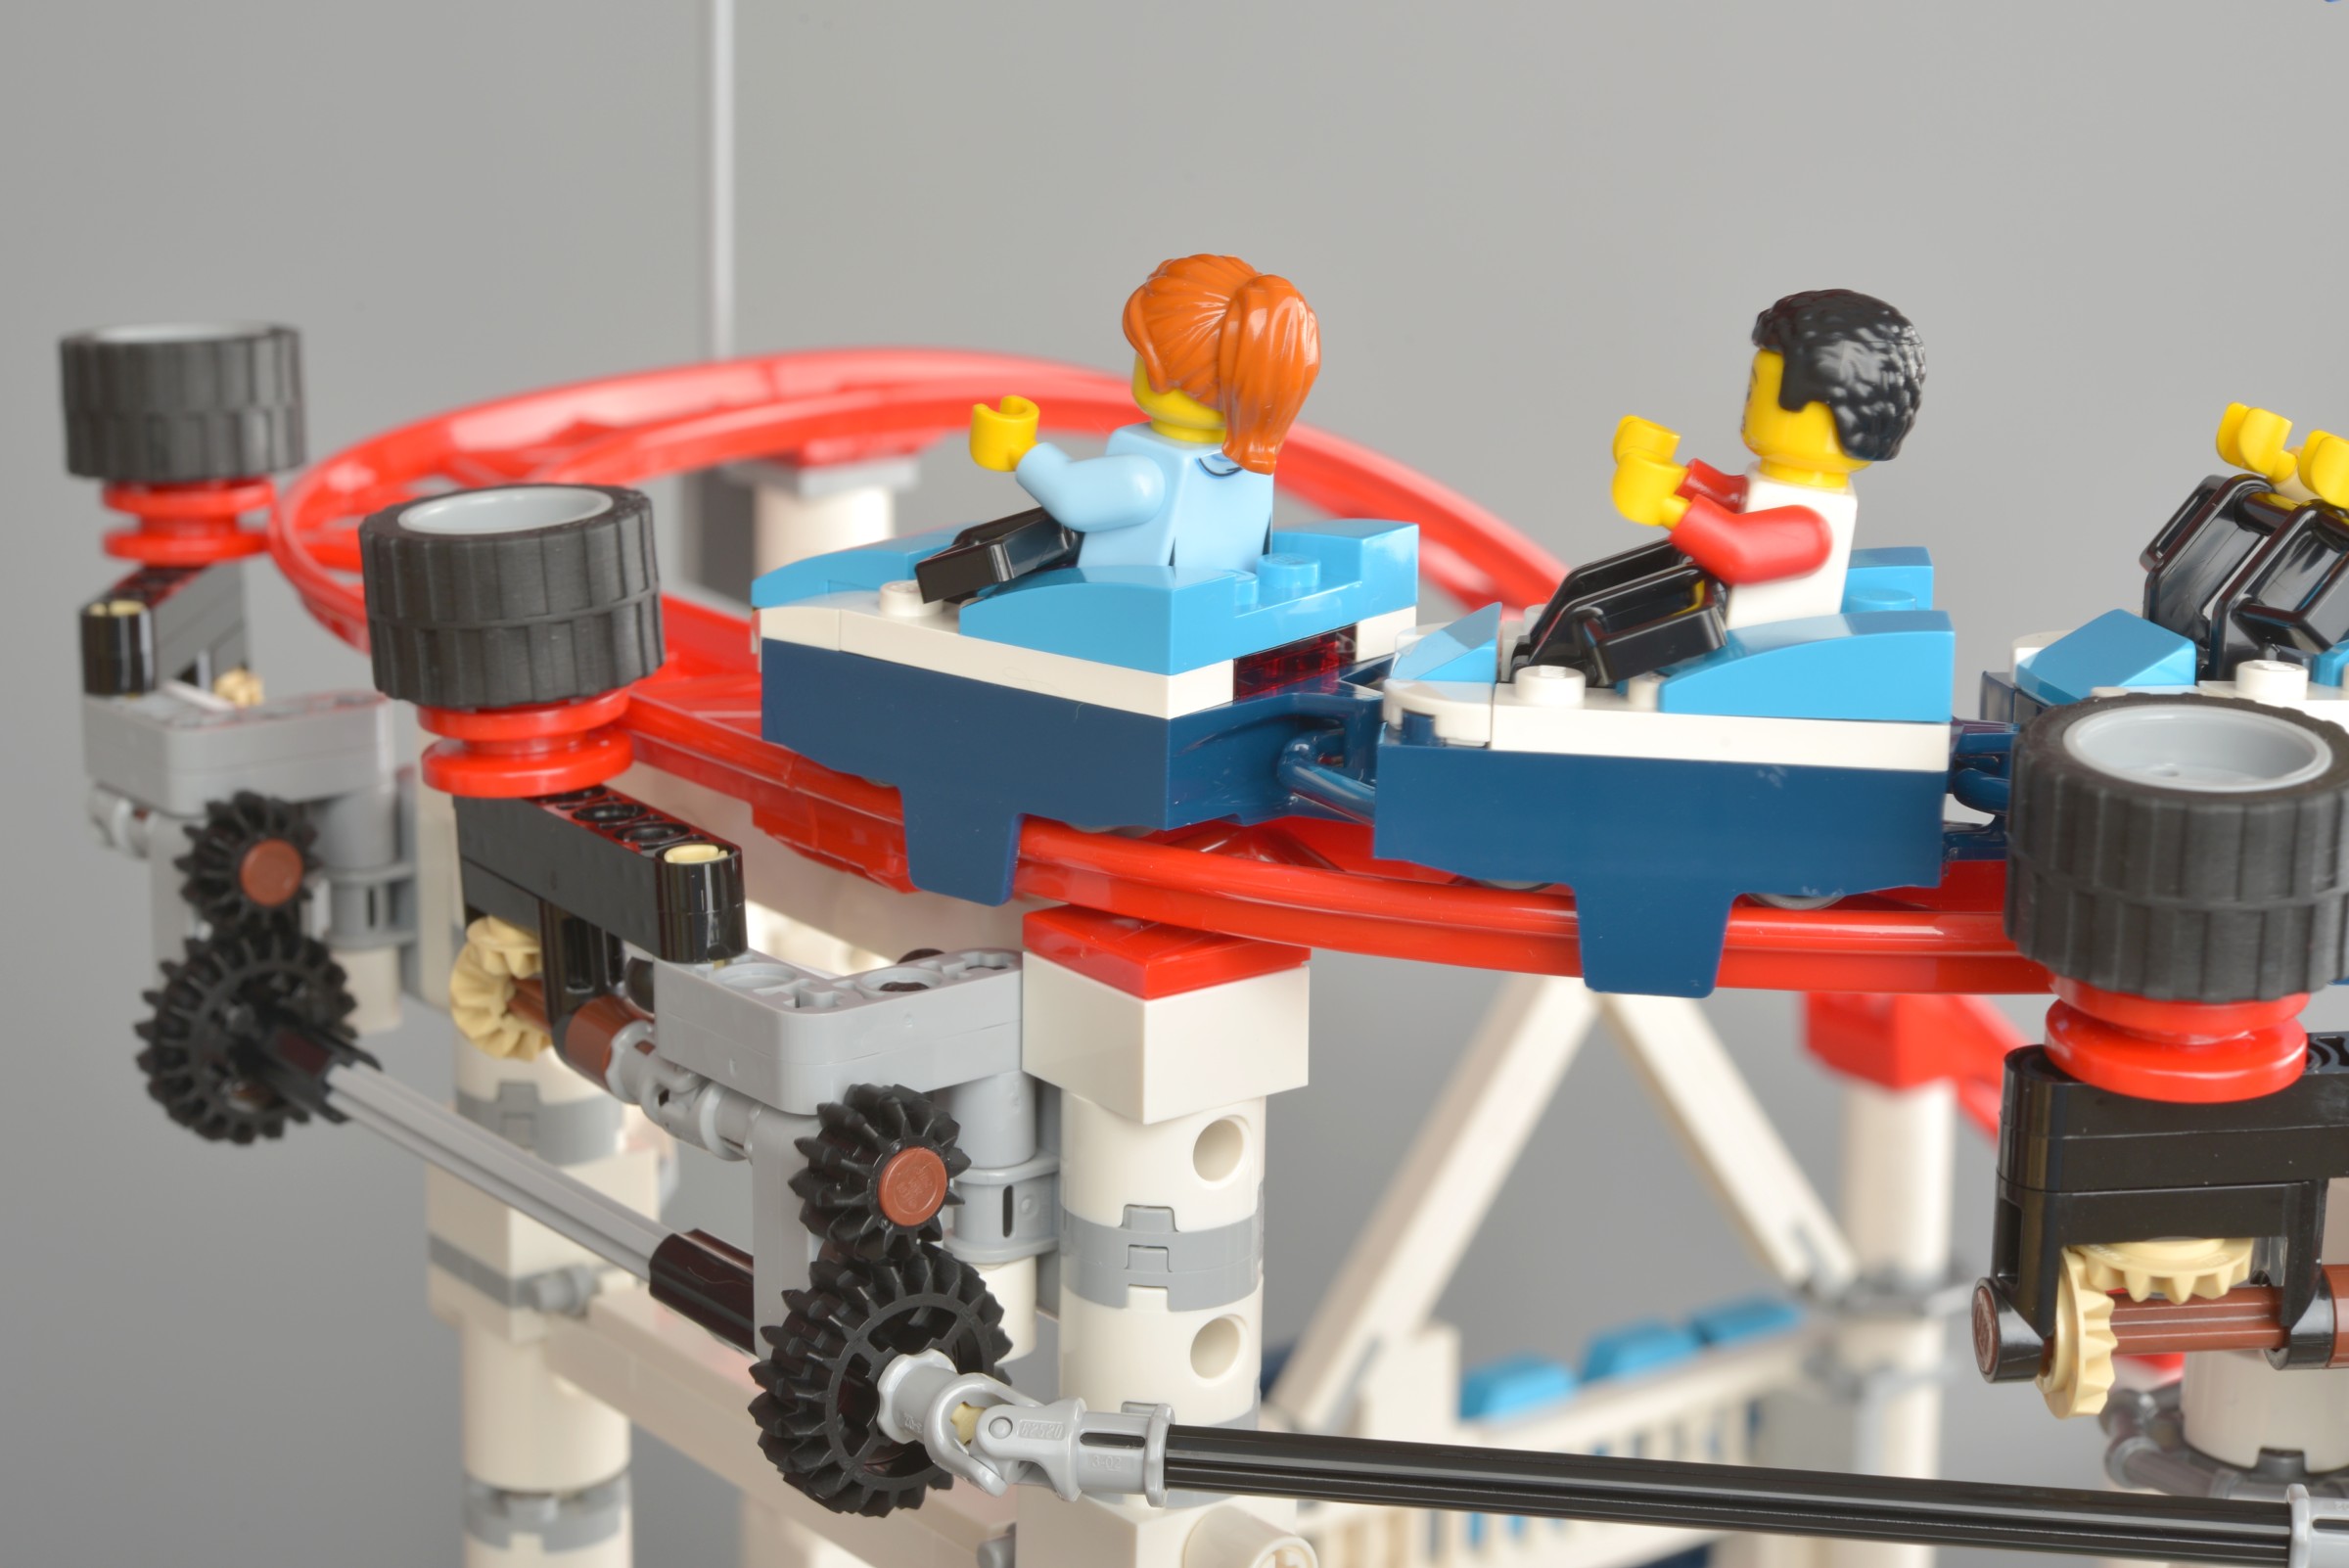 Lego people on a Lego Rollercoaster